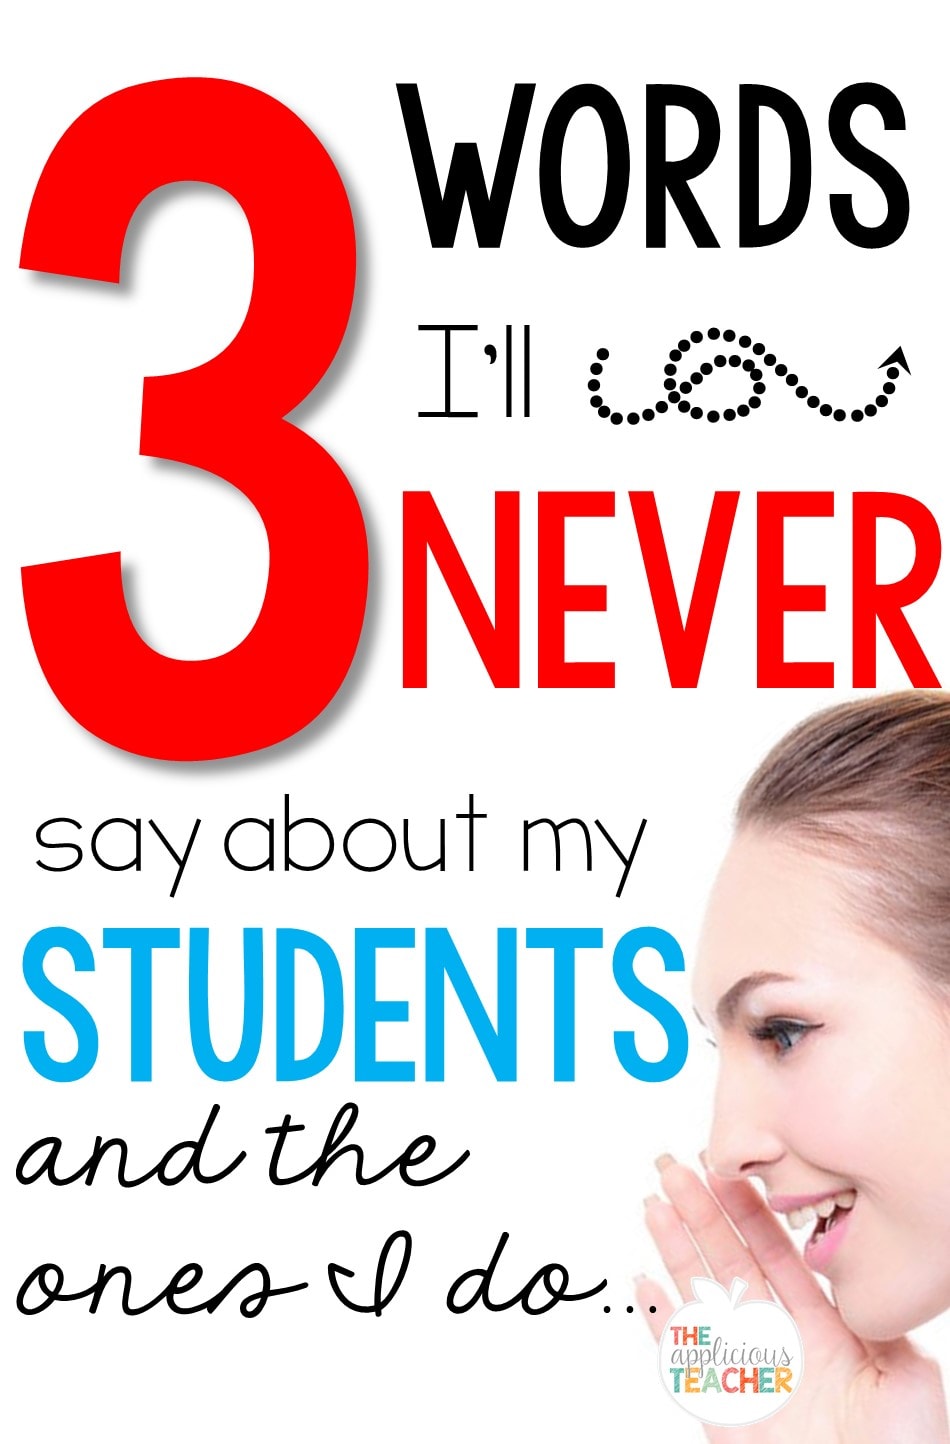 3 Words I'll Never Say about my students and the ones I do